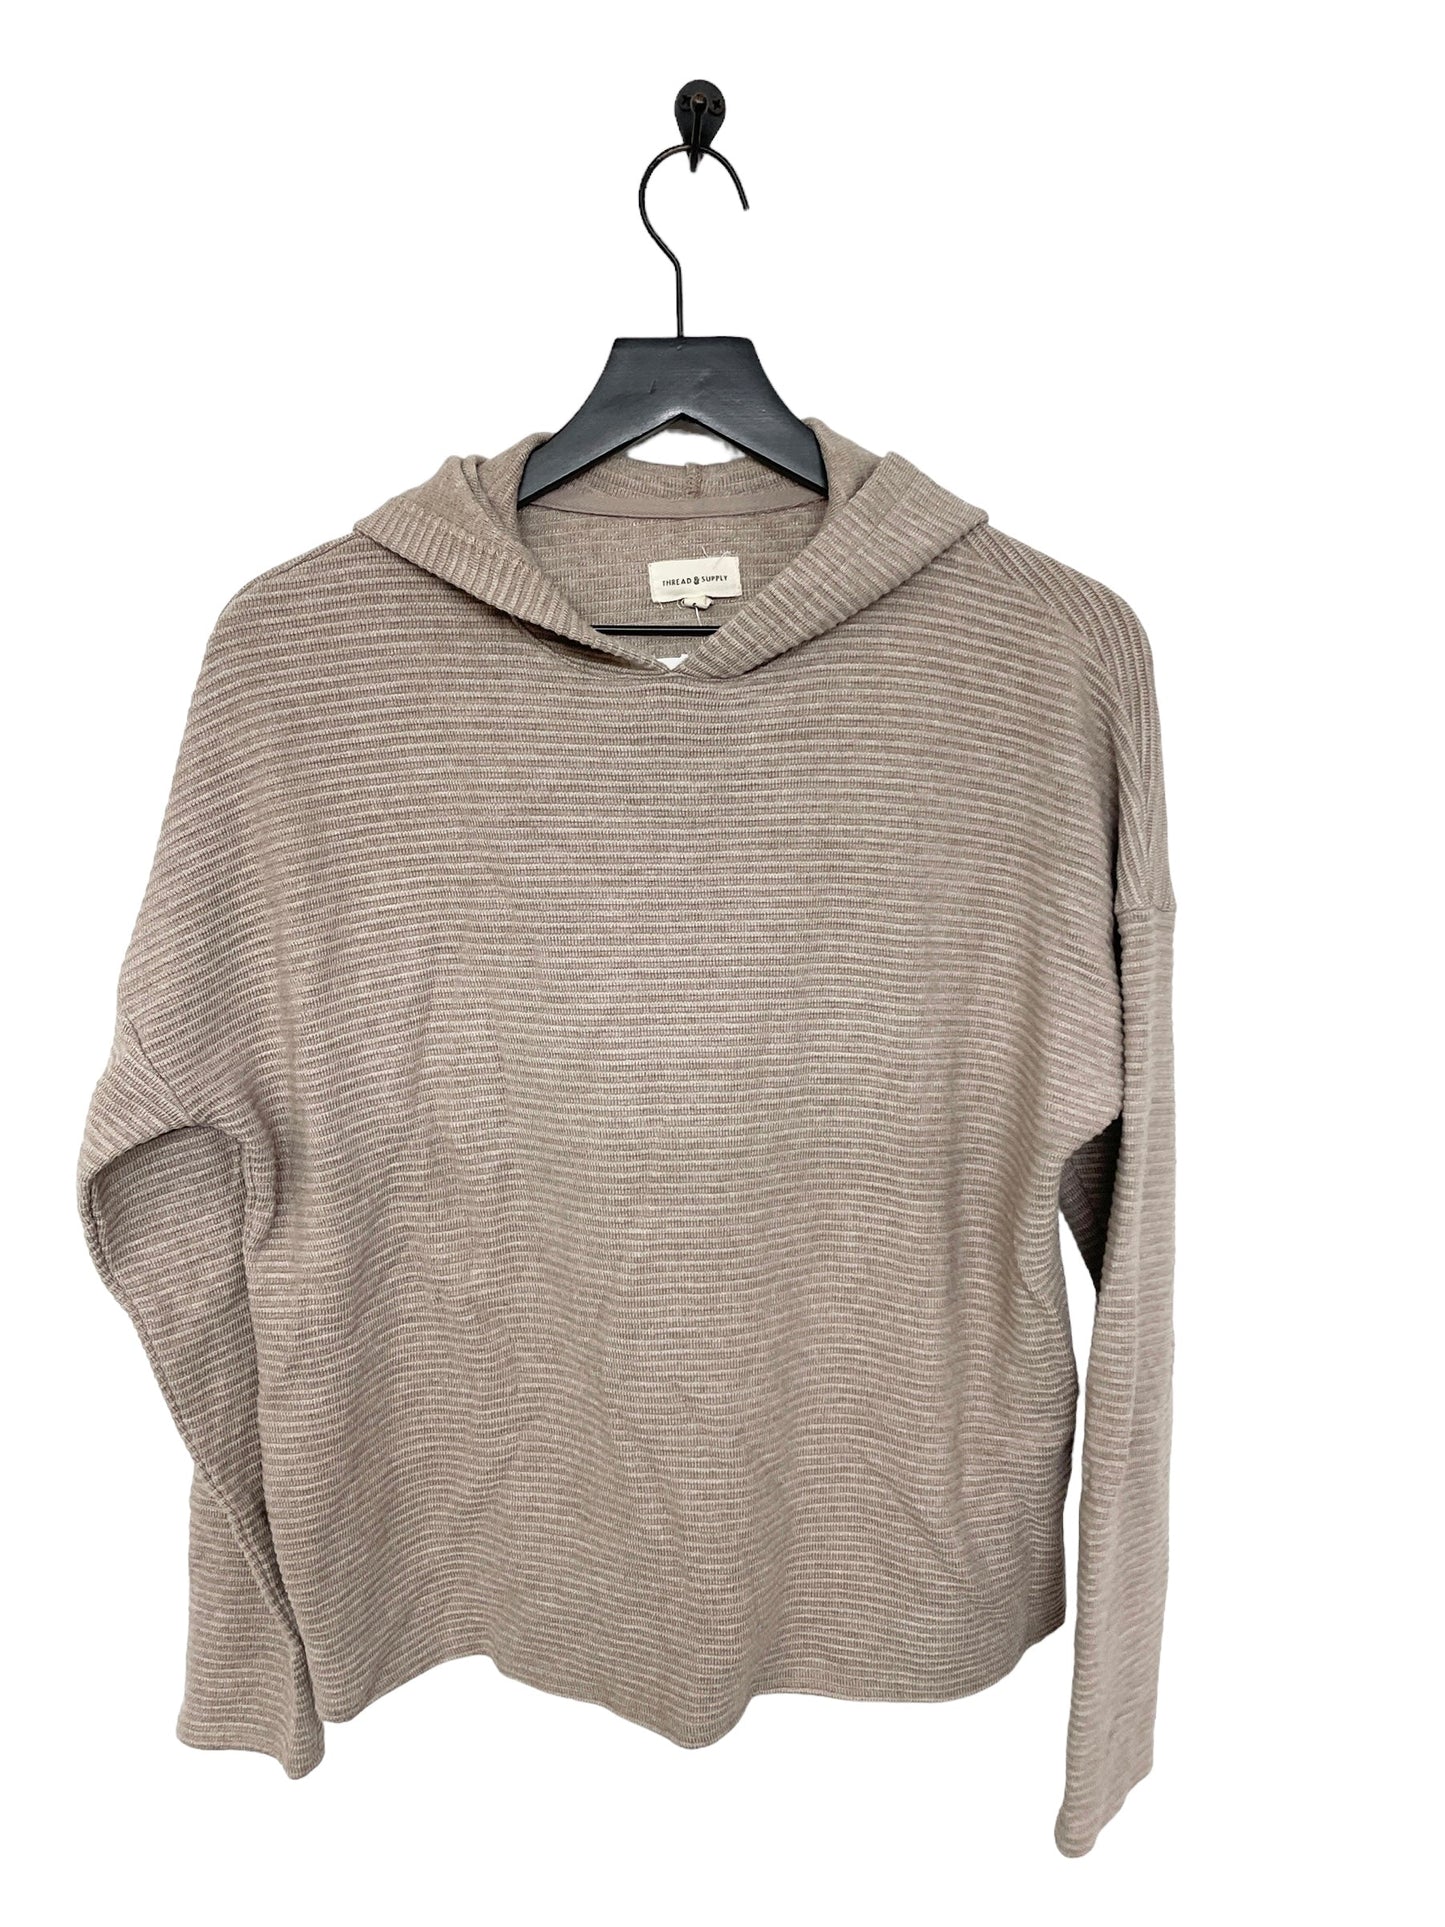 Tan Sweater Thread And Supply, Size S